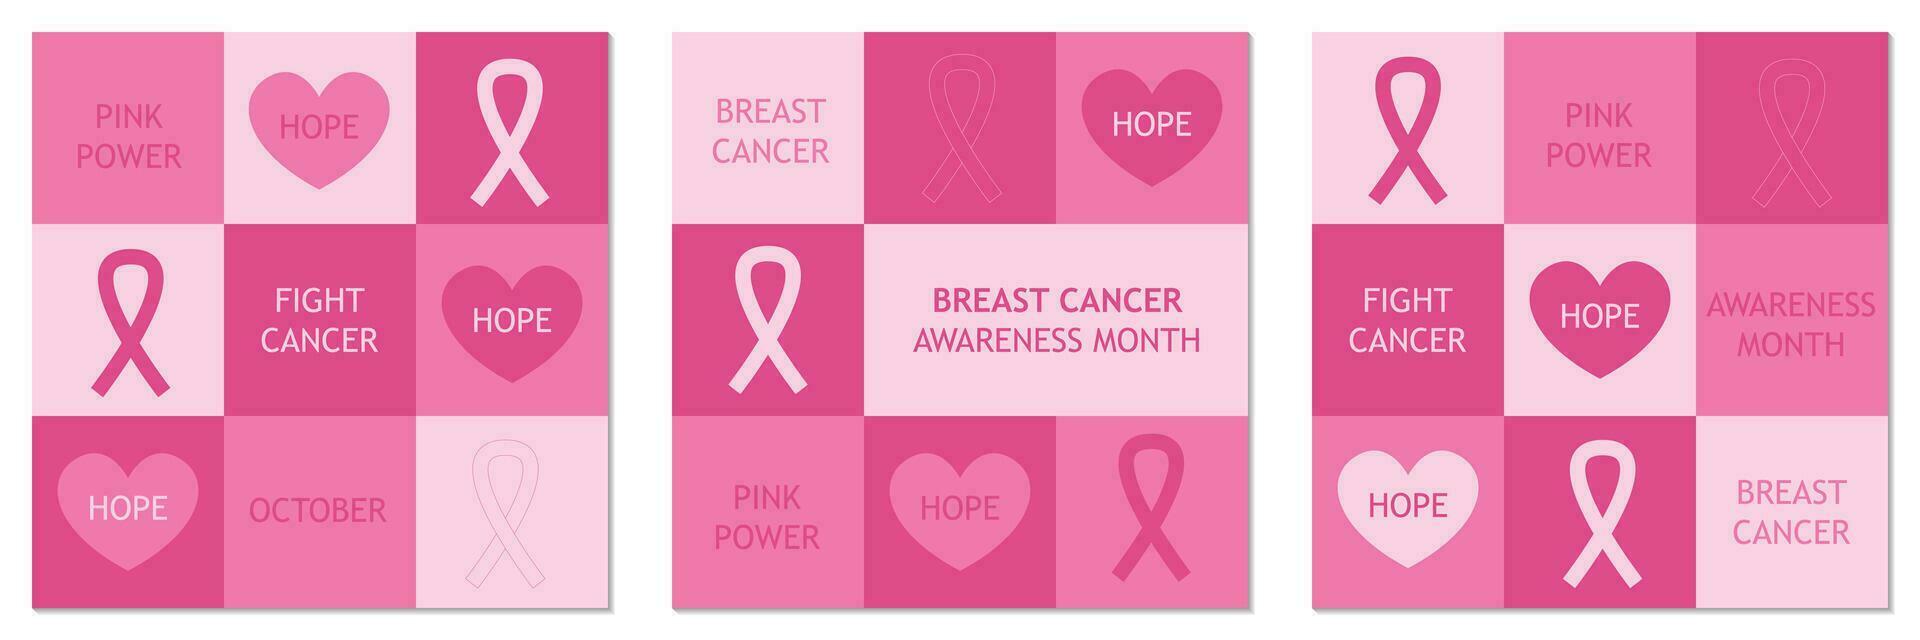 Breast Cancer Awareness Month. Set of greeting cards, banners, posters, covers. Trendy design with pink ribbons, heart and typography. Modern geometric minimalist style. Vector illustration